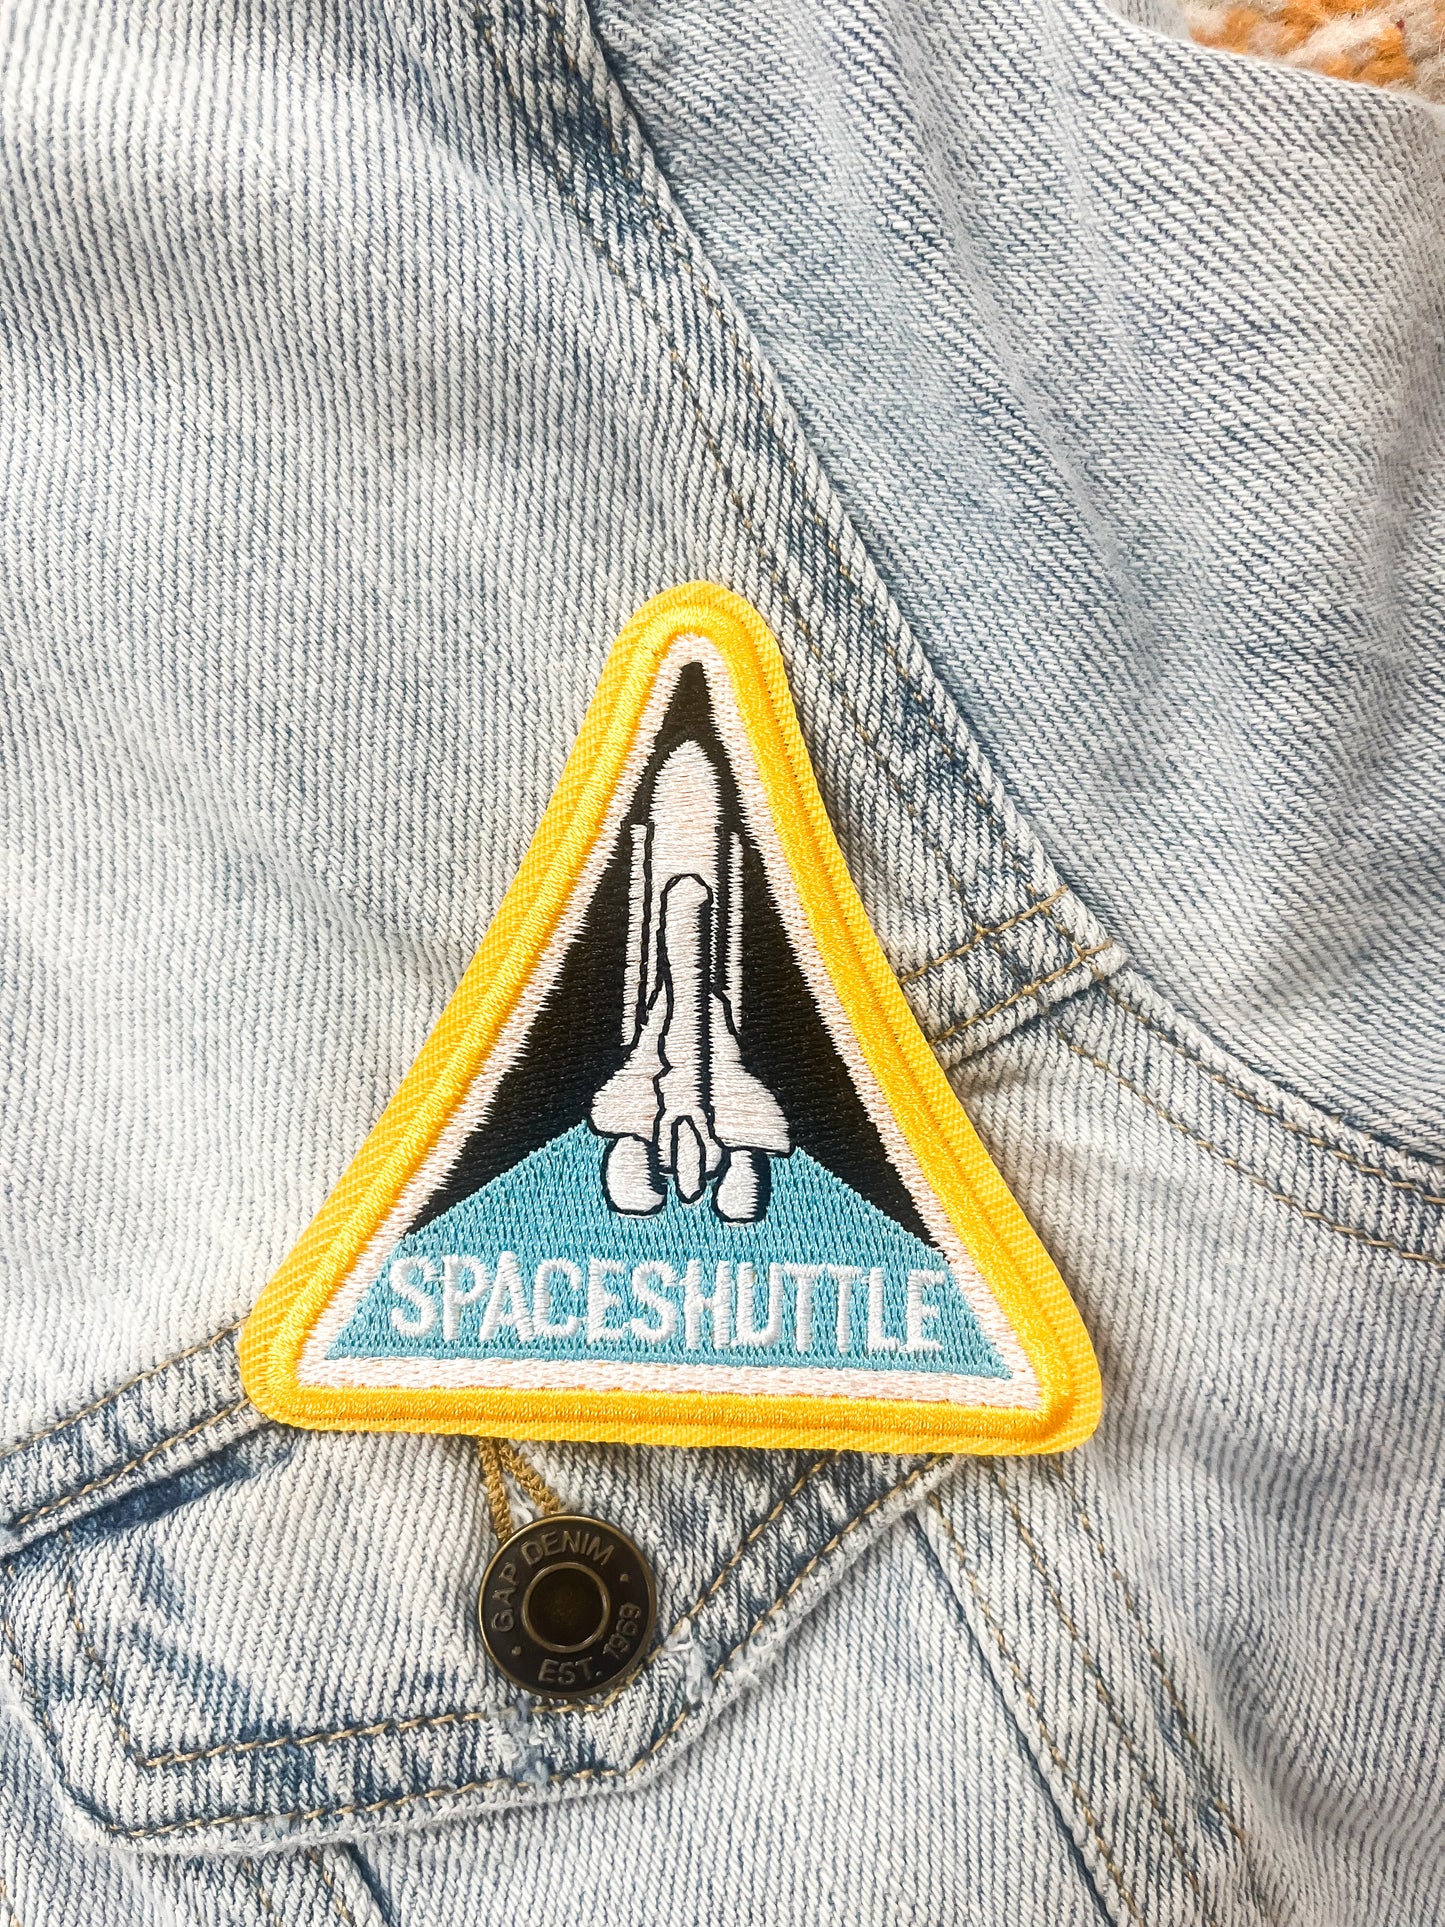 Space Shuttle patch